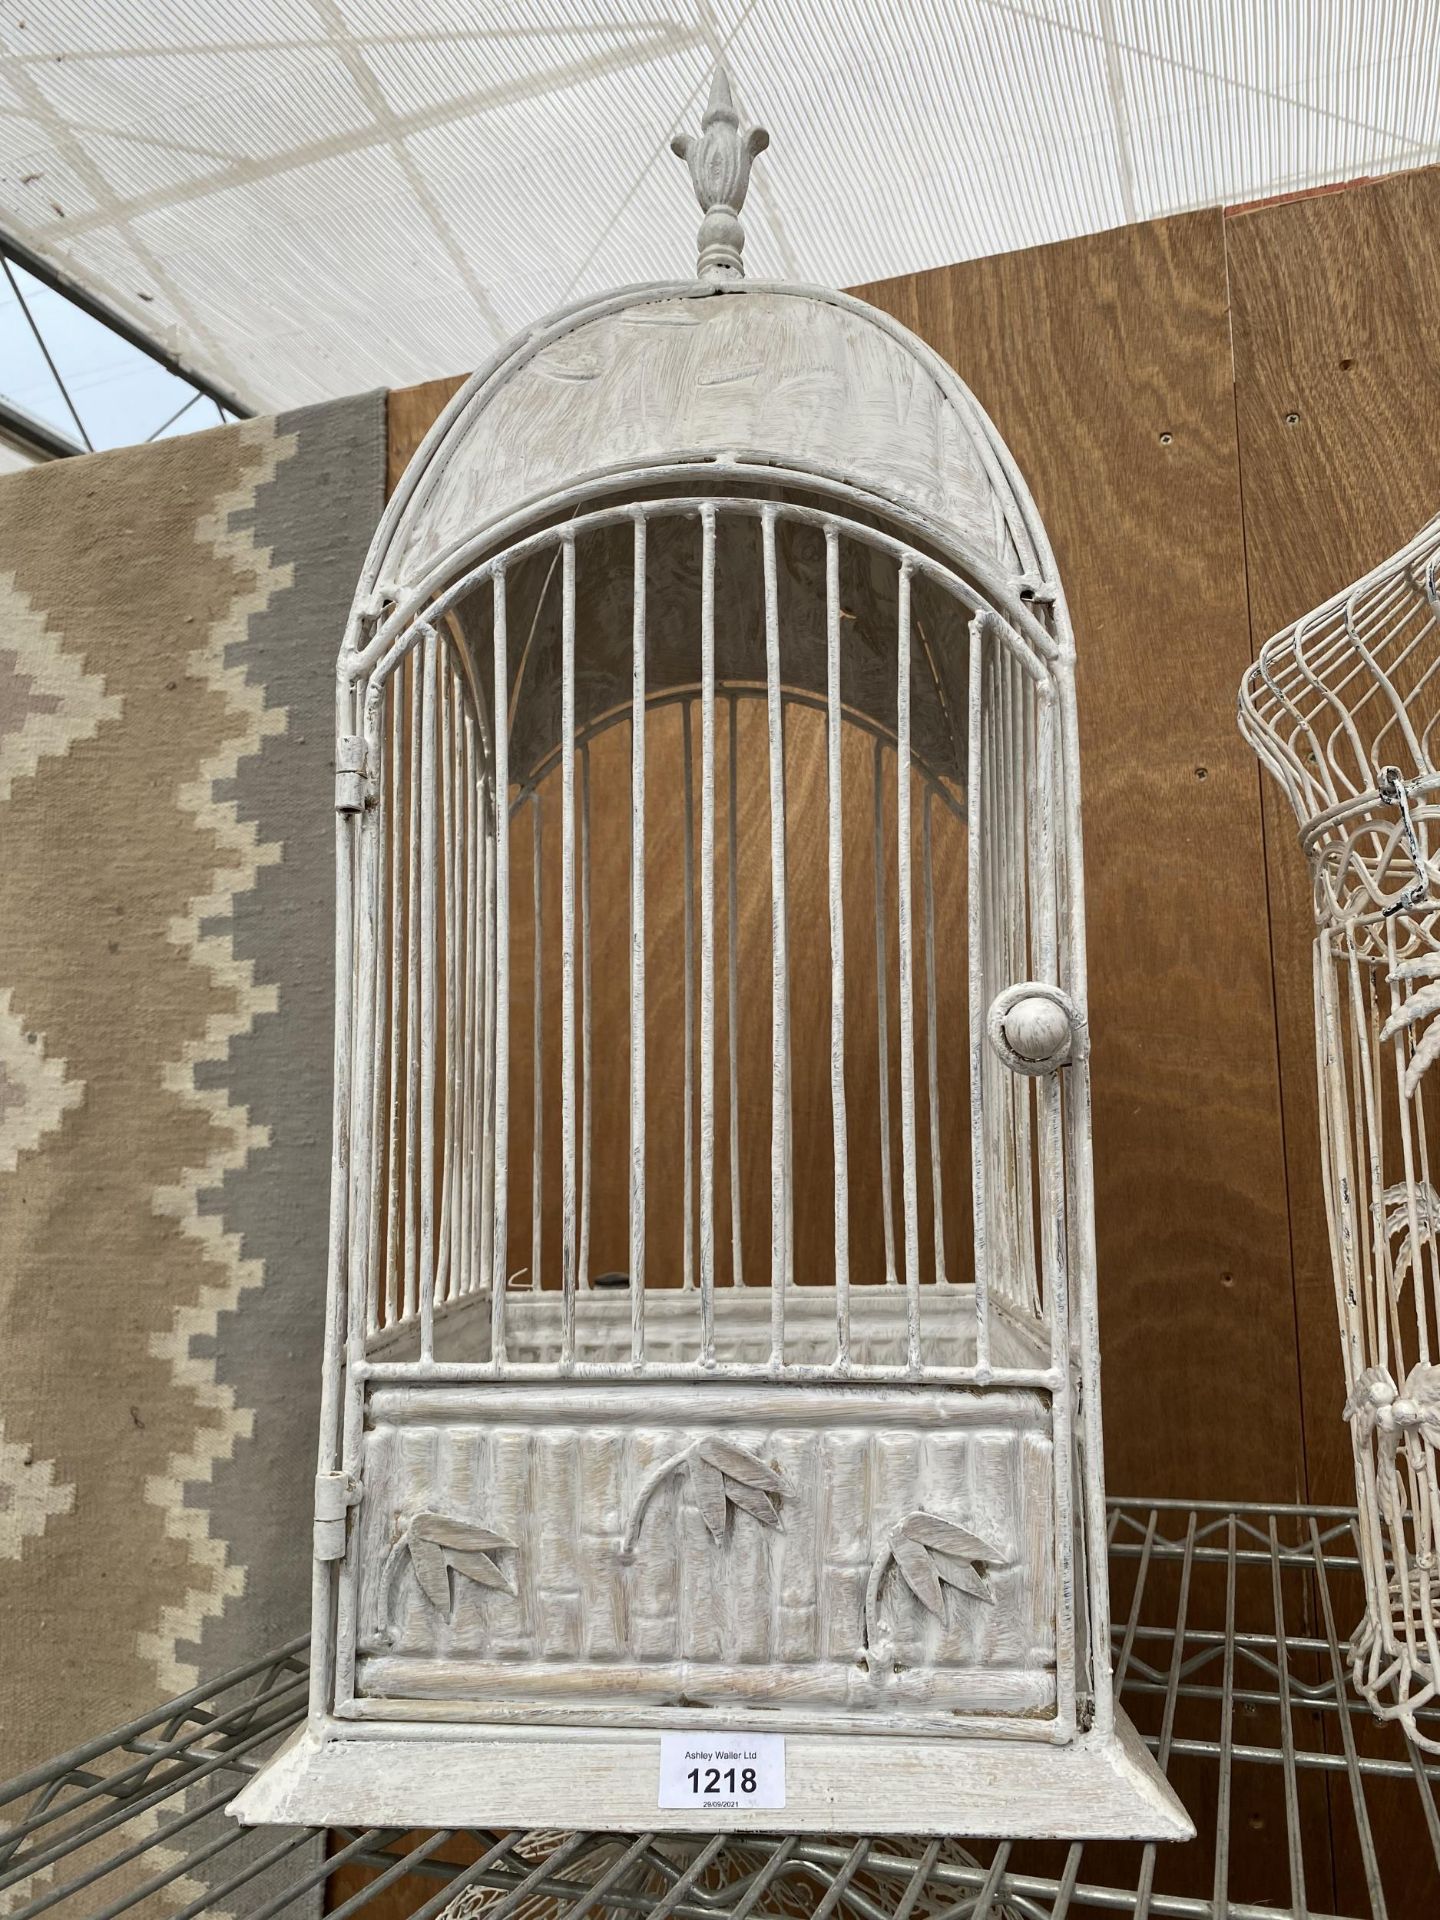 TWO DECORATIVE METAL BIRD CAGES - Image 4 of 5